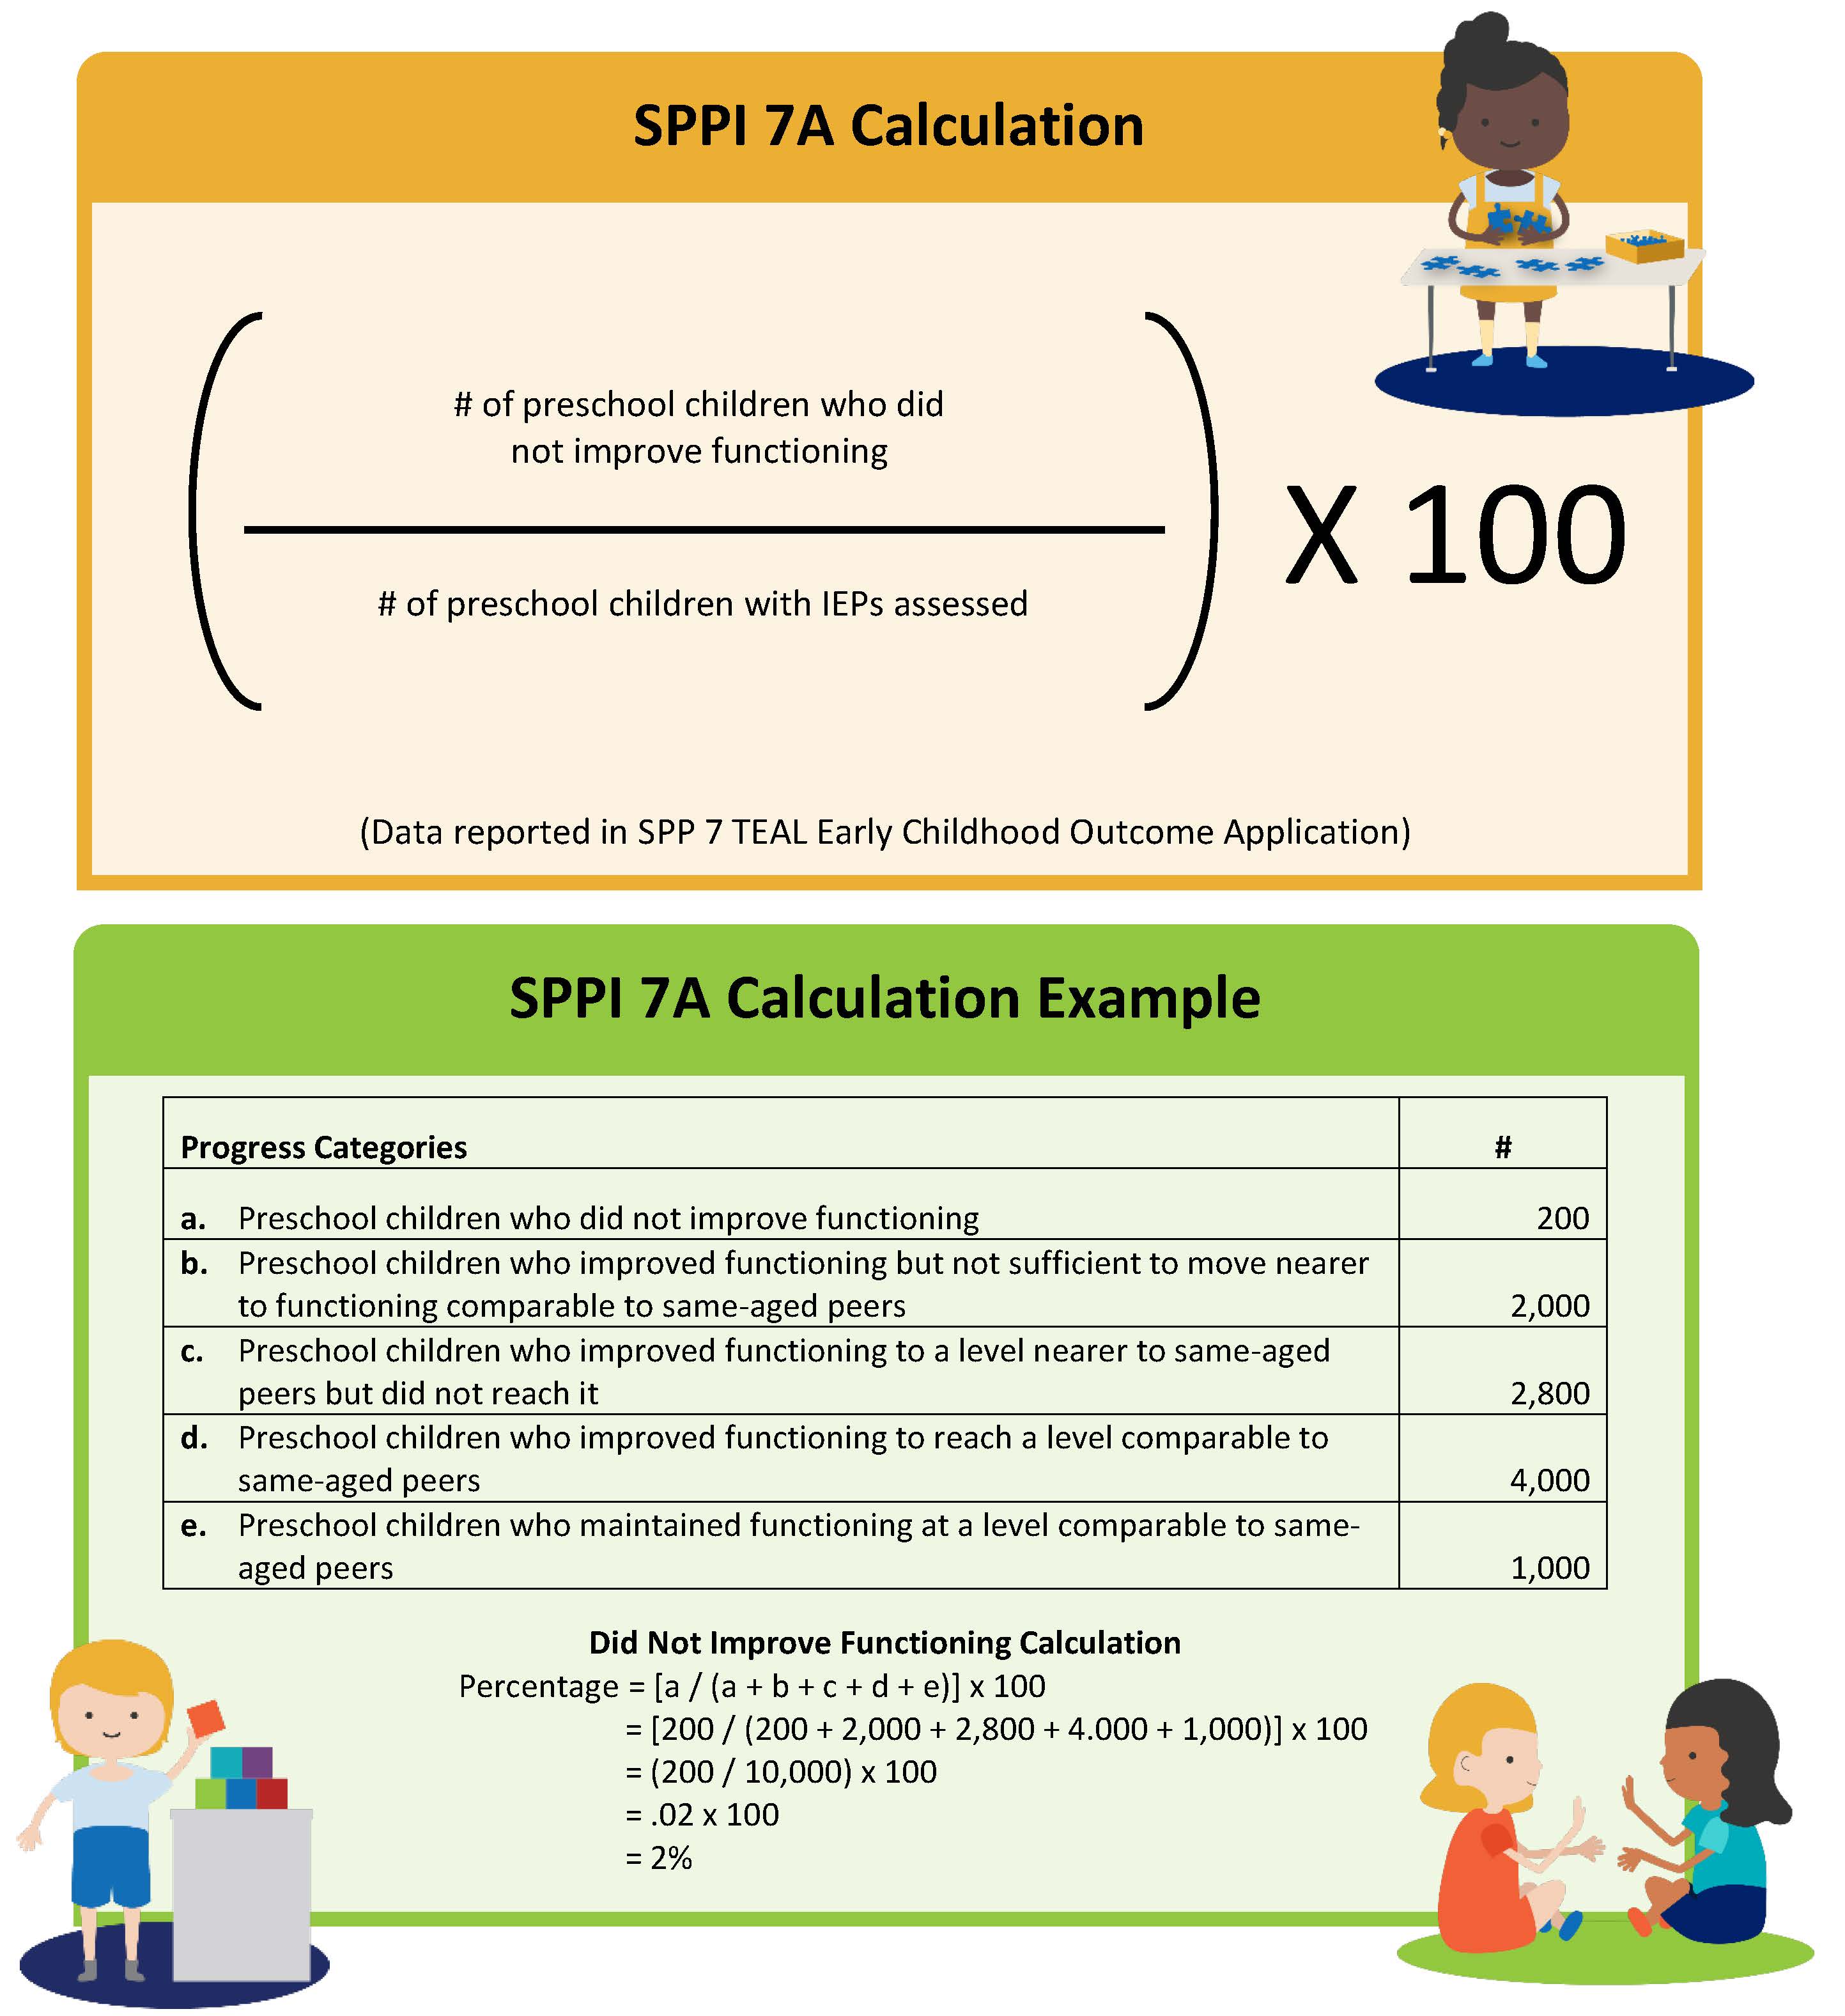 SPPI 7A Calculation and Example